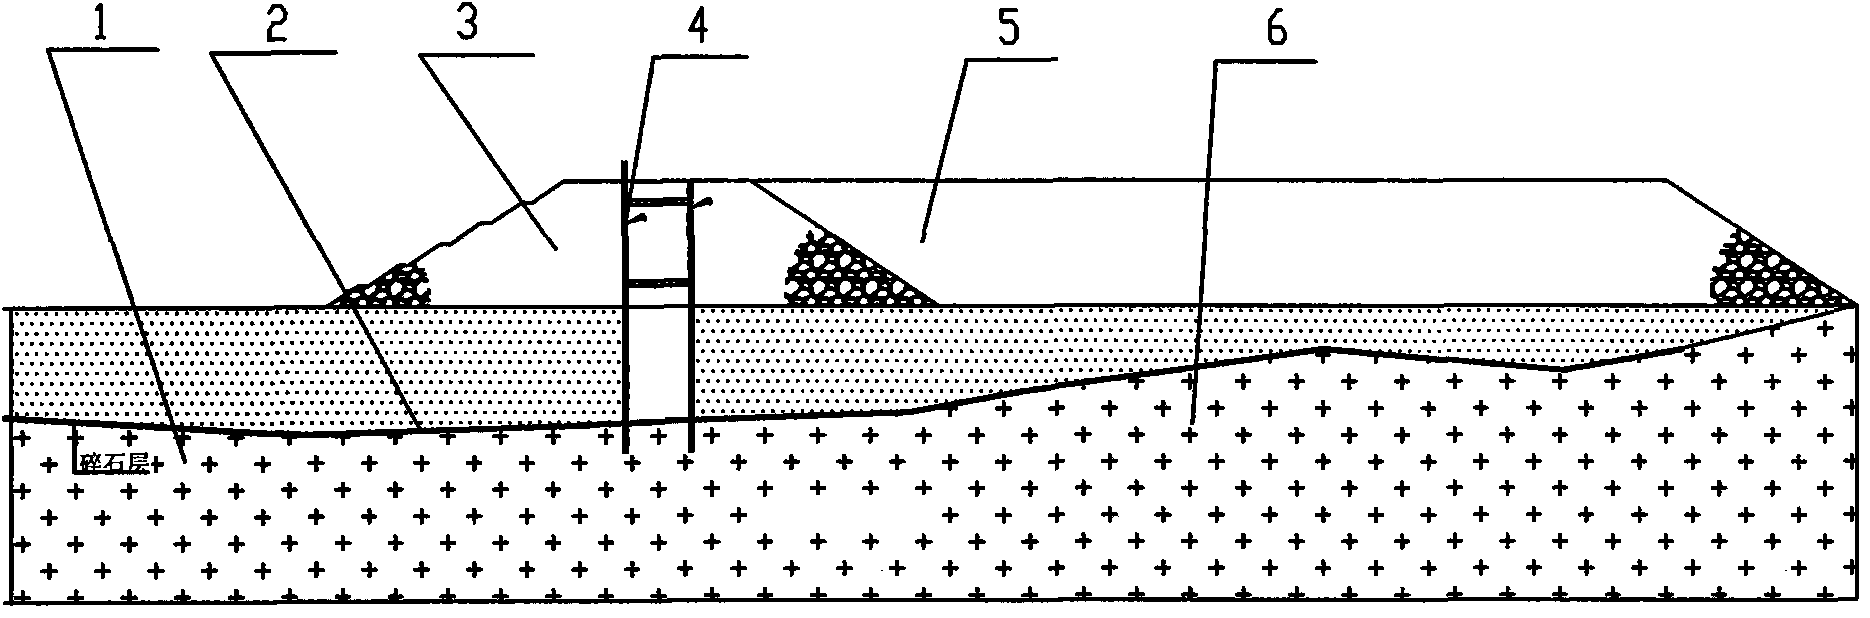 Method for building impermeable tailings dams with high scattered piles by waste rocks